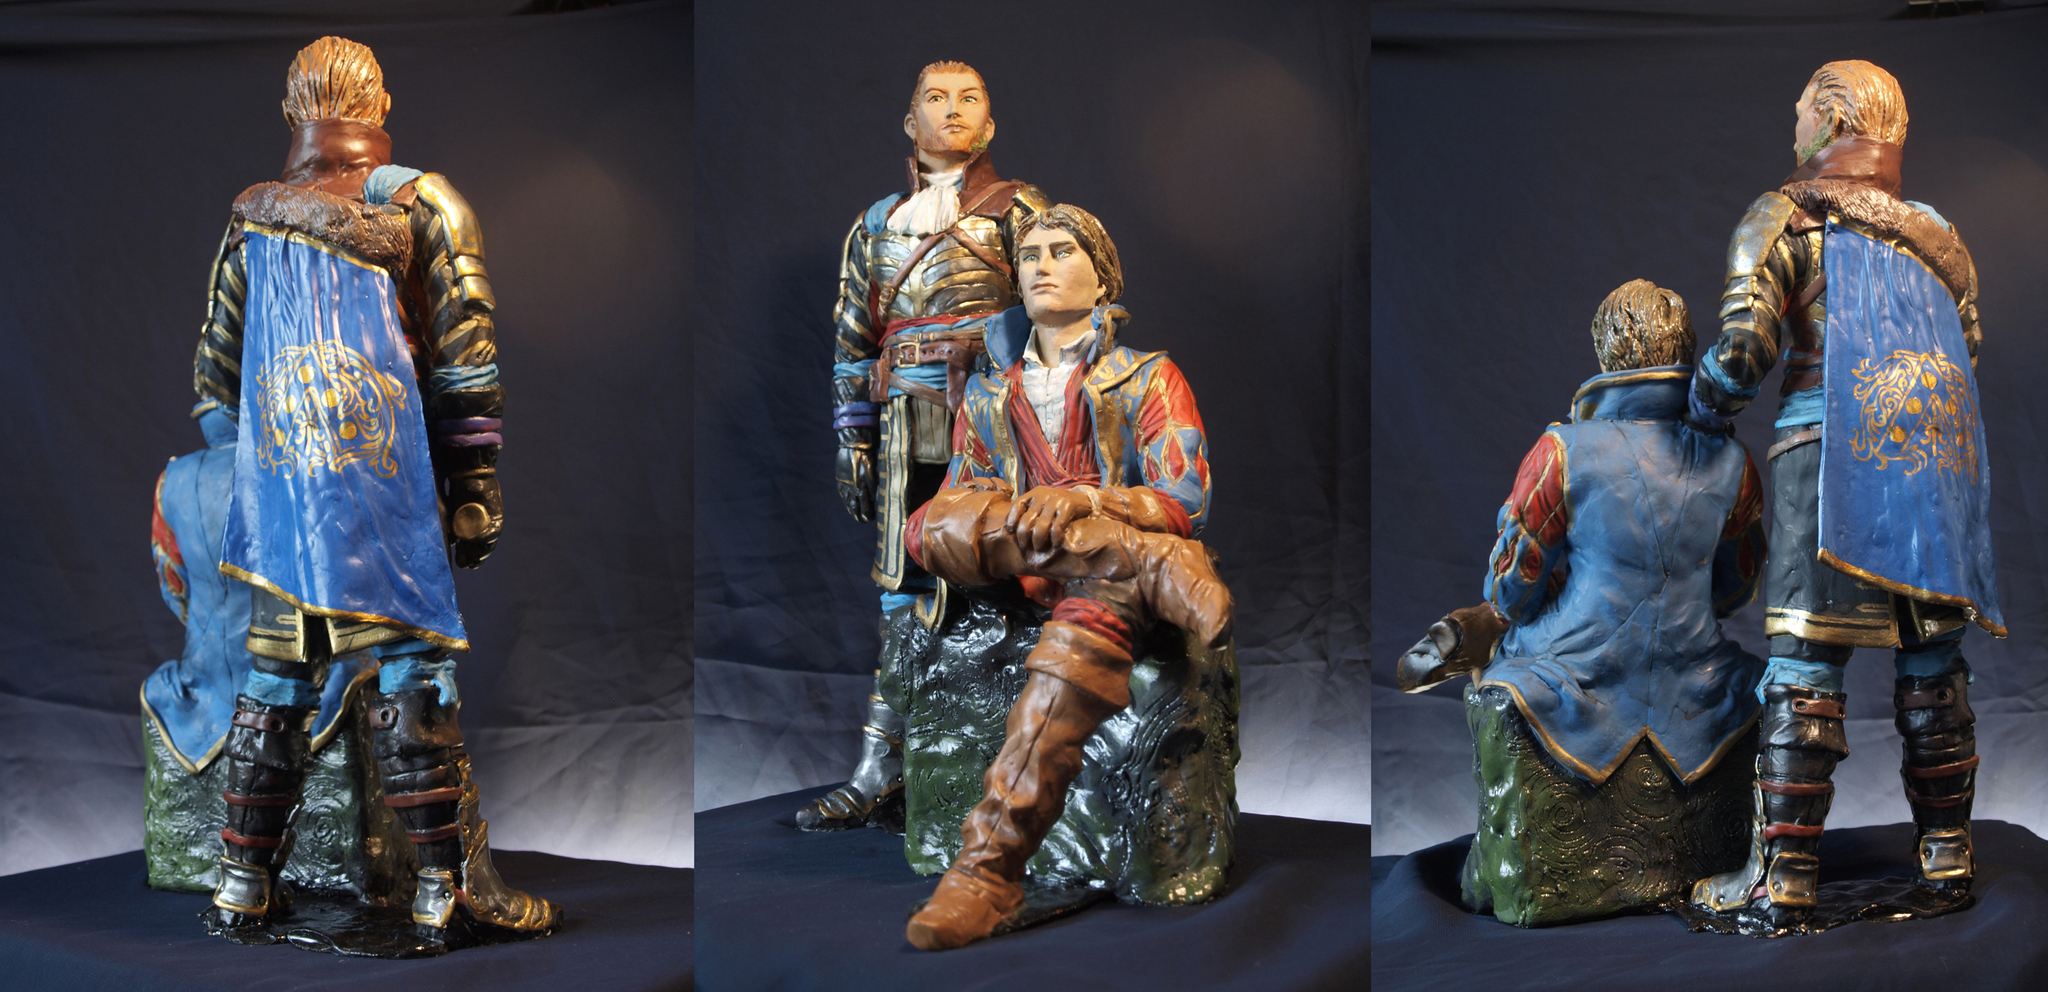 Figures based on the game Greedfall. De Sarde and Constantin De Orsay - My, Kai Yara, Needlework without process, Sculpture, Figurines, Greedfall, Video, Youtube, Longpost